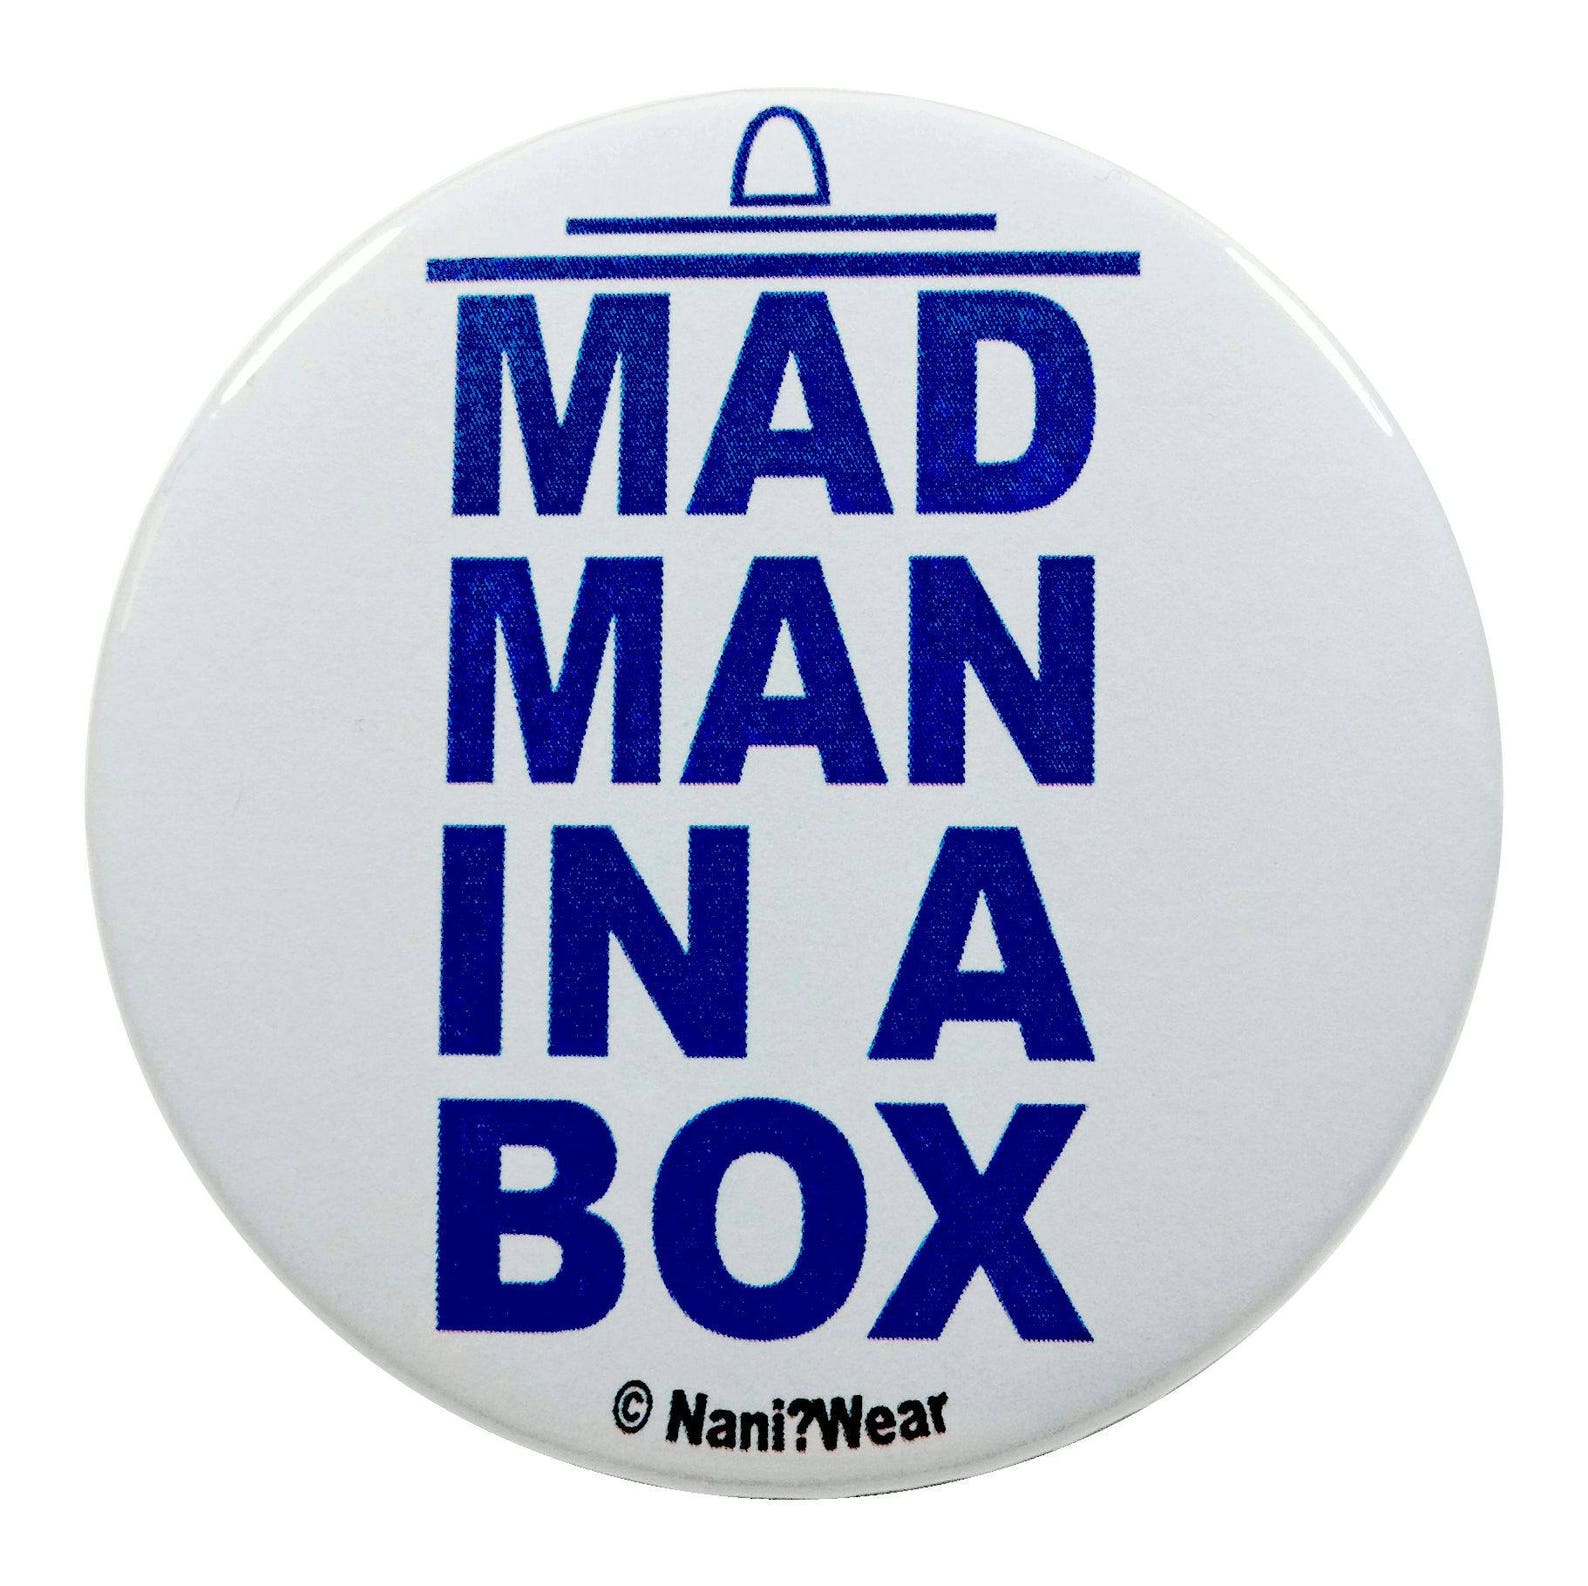 Who mad who. Madman with a Box. Mad Box.